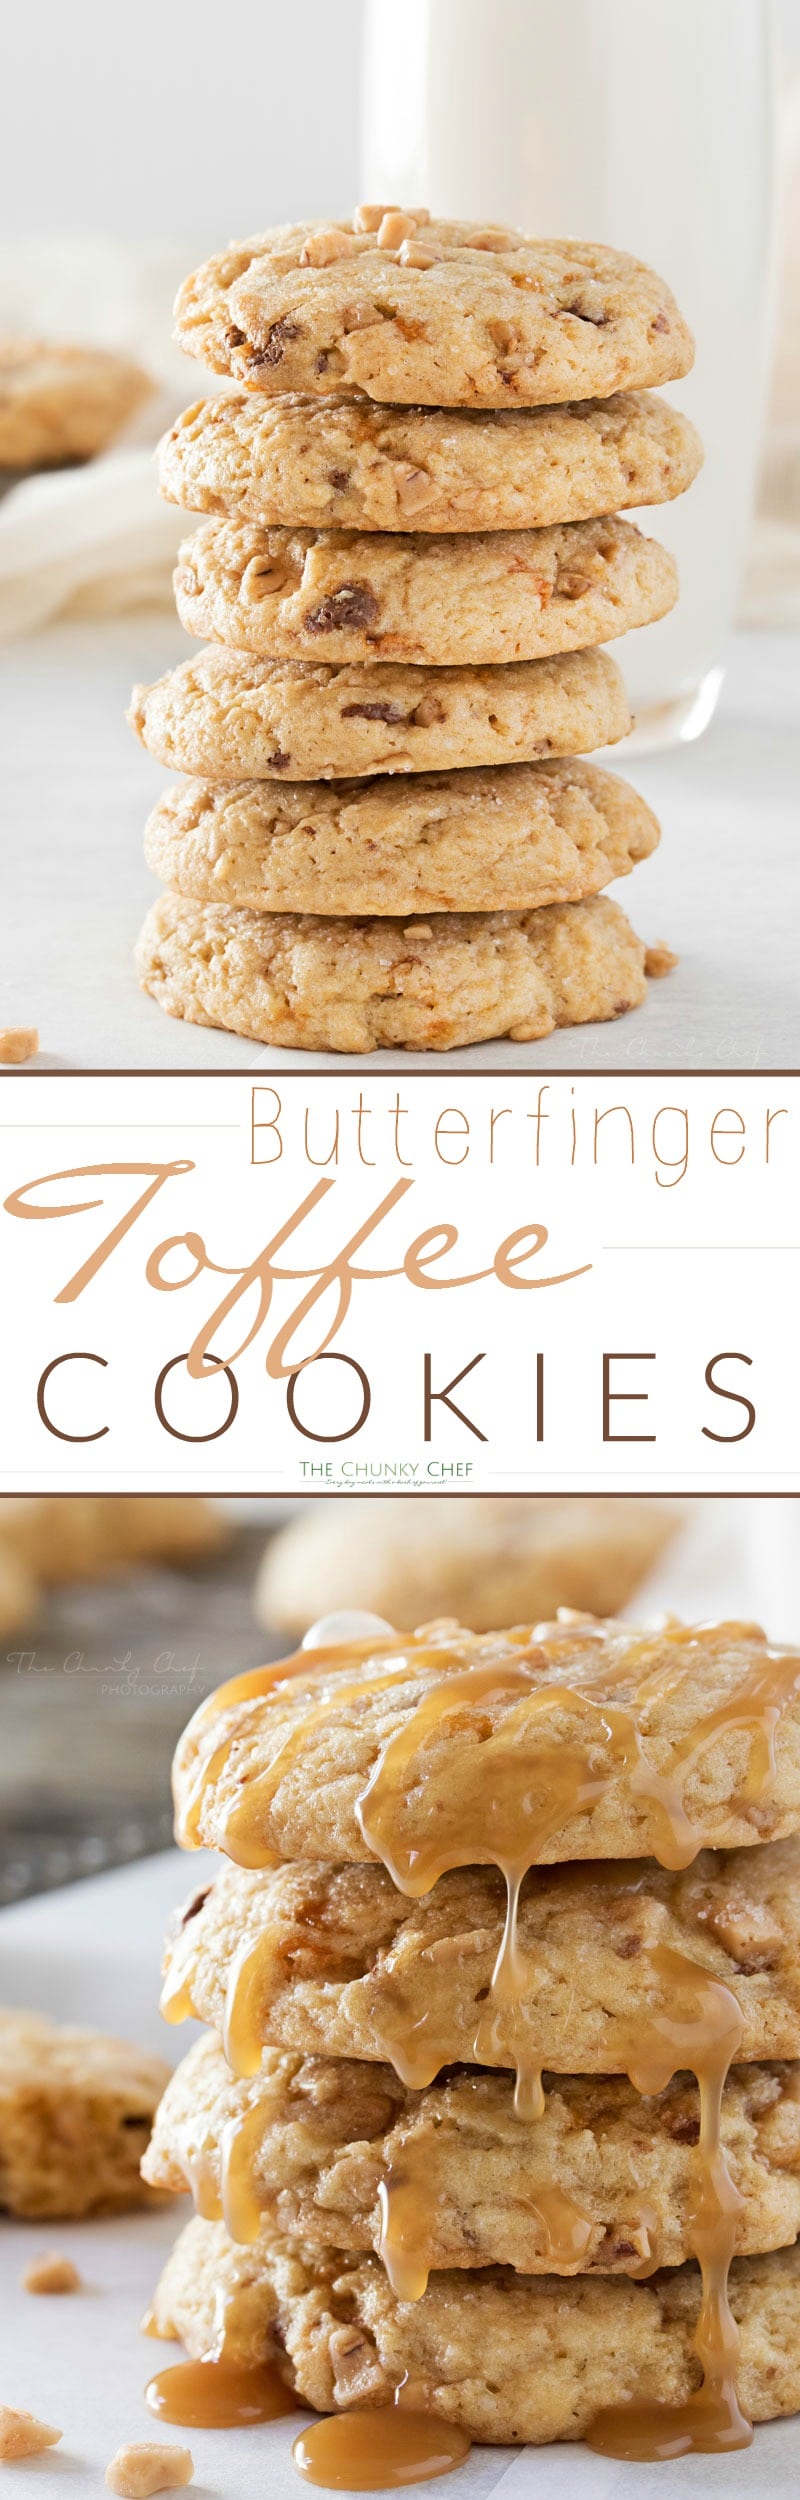 Chewy Butterfinger Toffee Cookies The Chunky Chef,Lovebirds As Pets